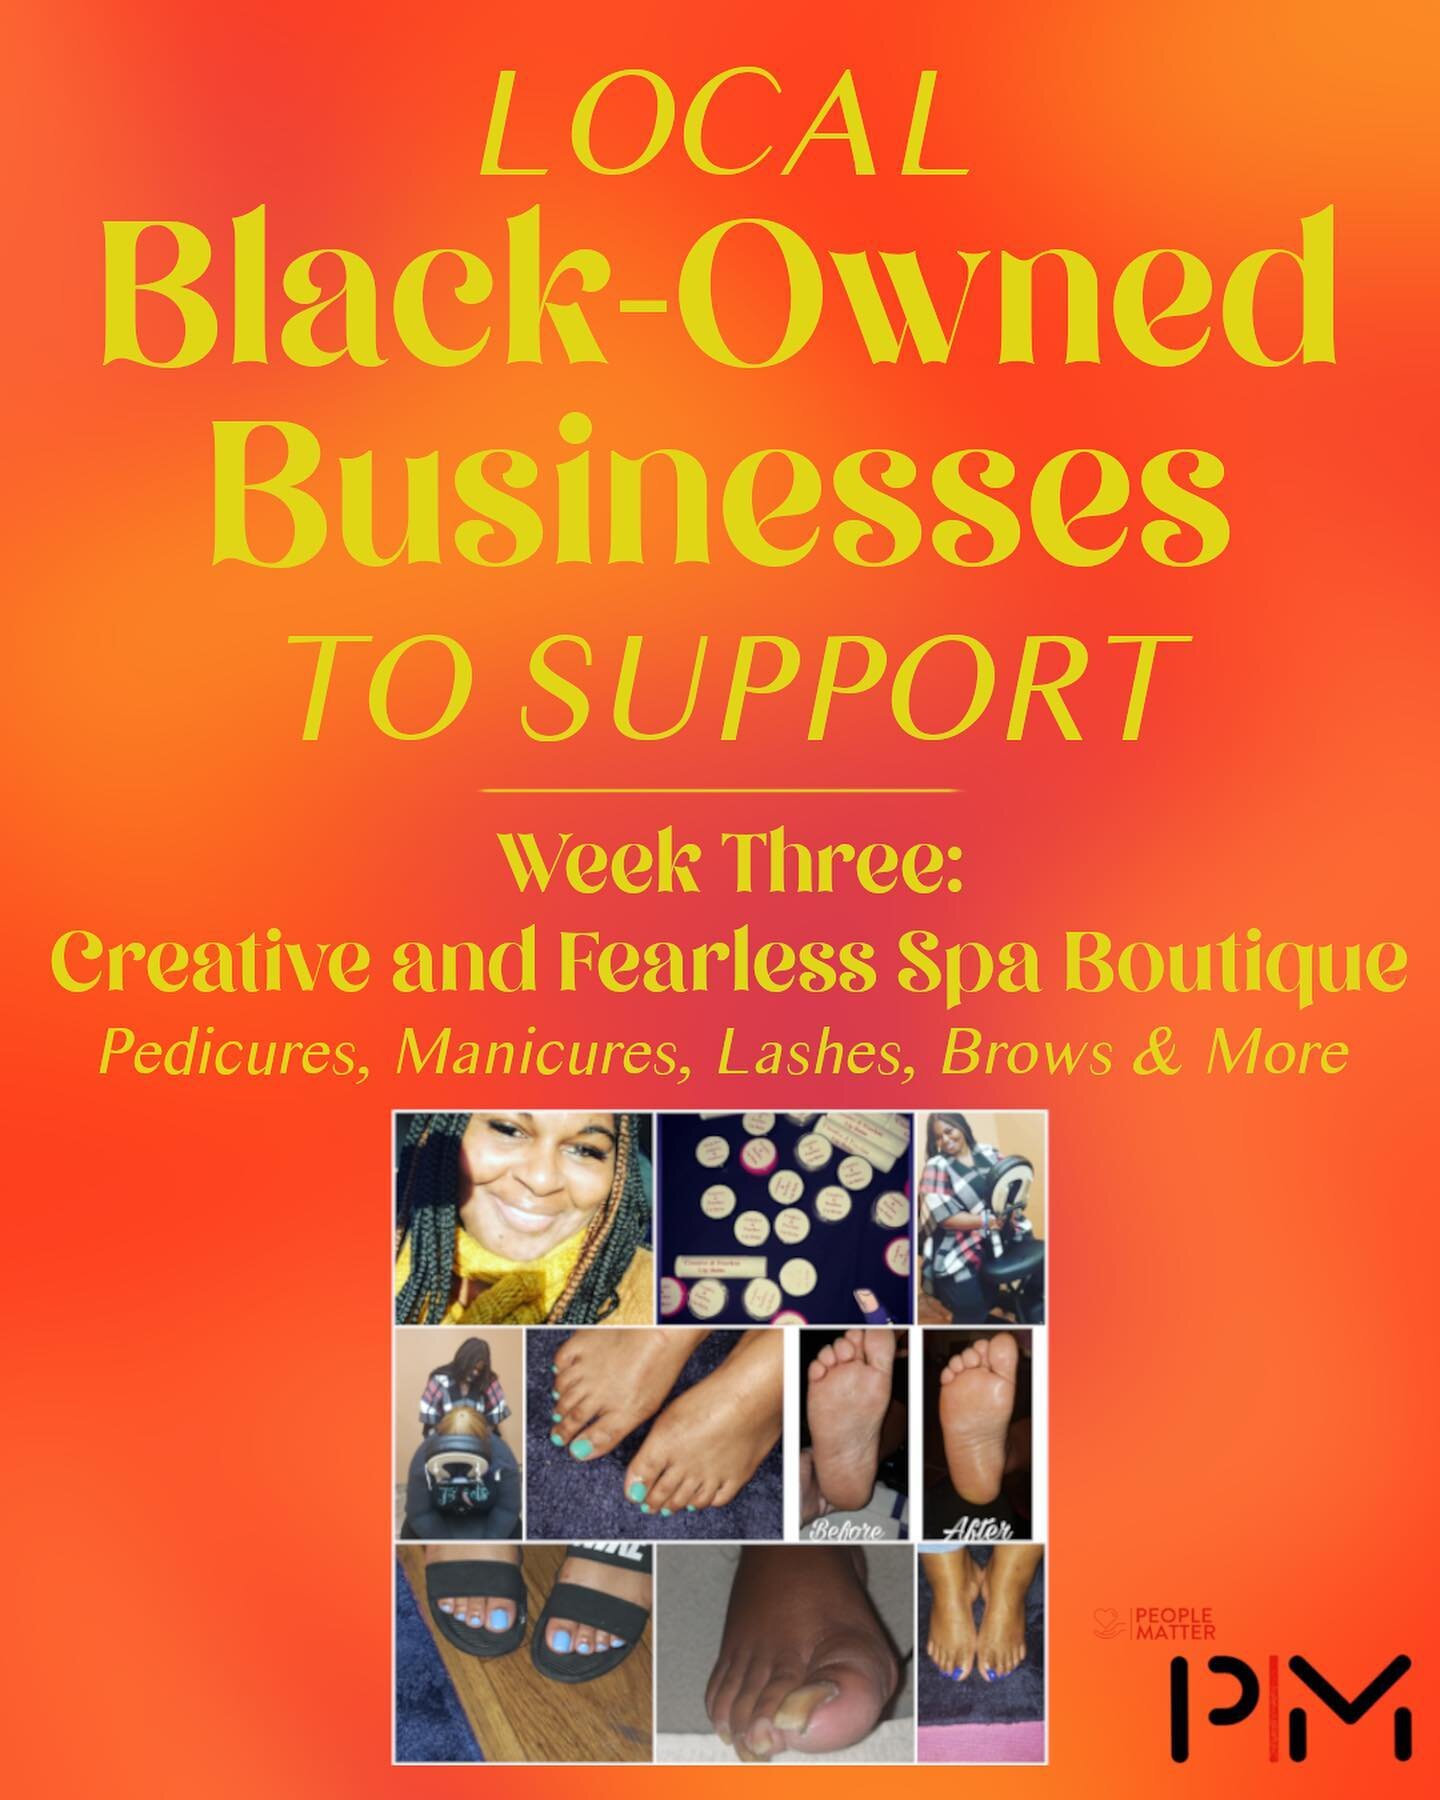 For this holiday season, we are shouting out small black-owned businesses committed to giving back to the black community! 

This last week, we are highlighting Creative and Fearless Spa Boutique, a Illinois spa boutique run by Tresa Carroll that doe